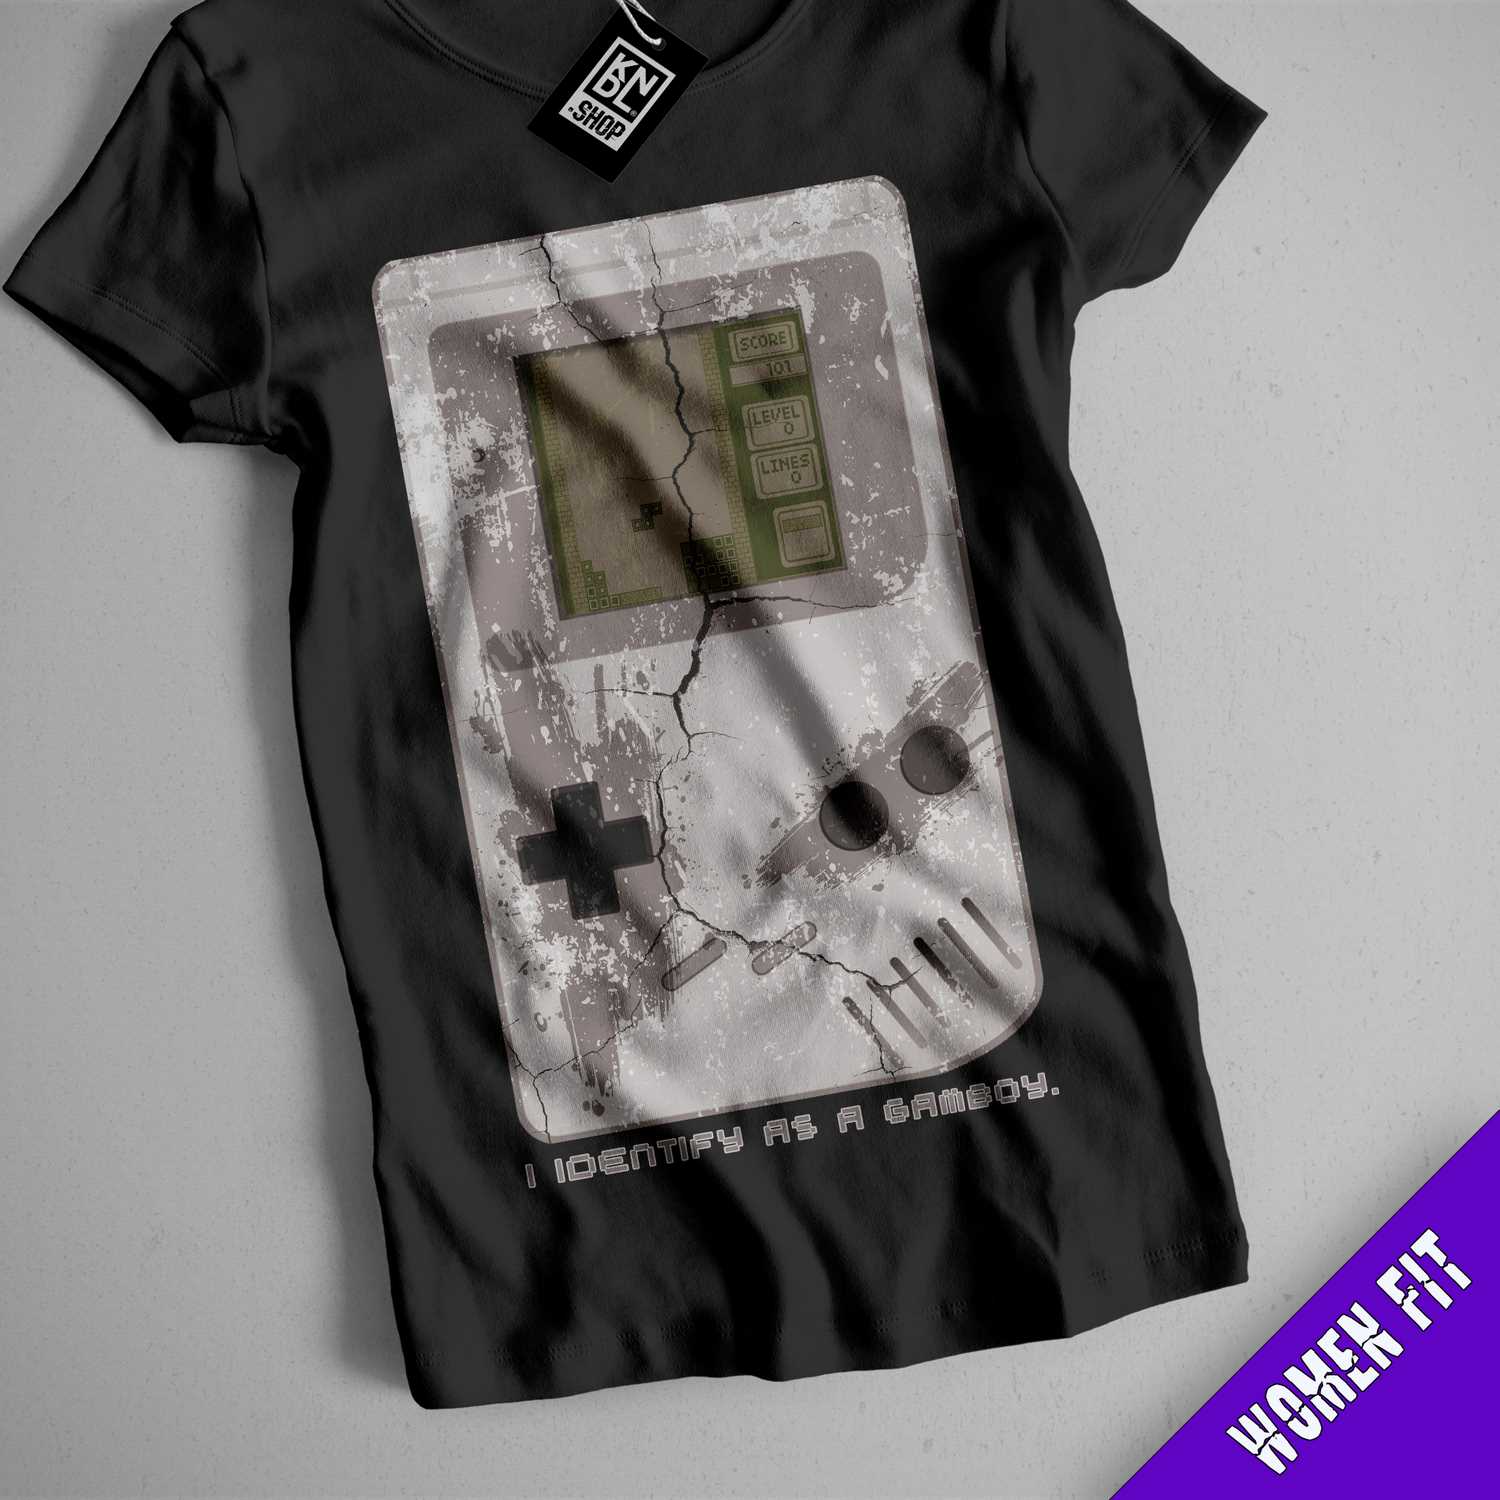 a t - shirt that has a game boy on it